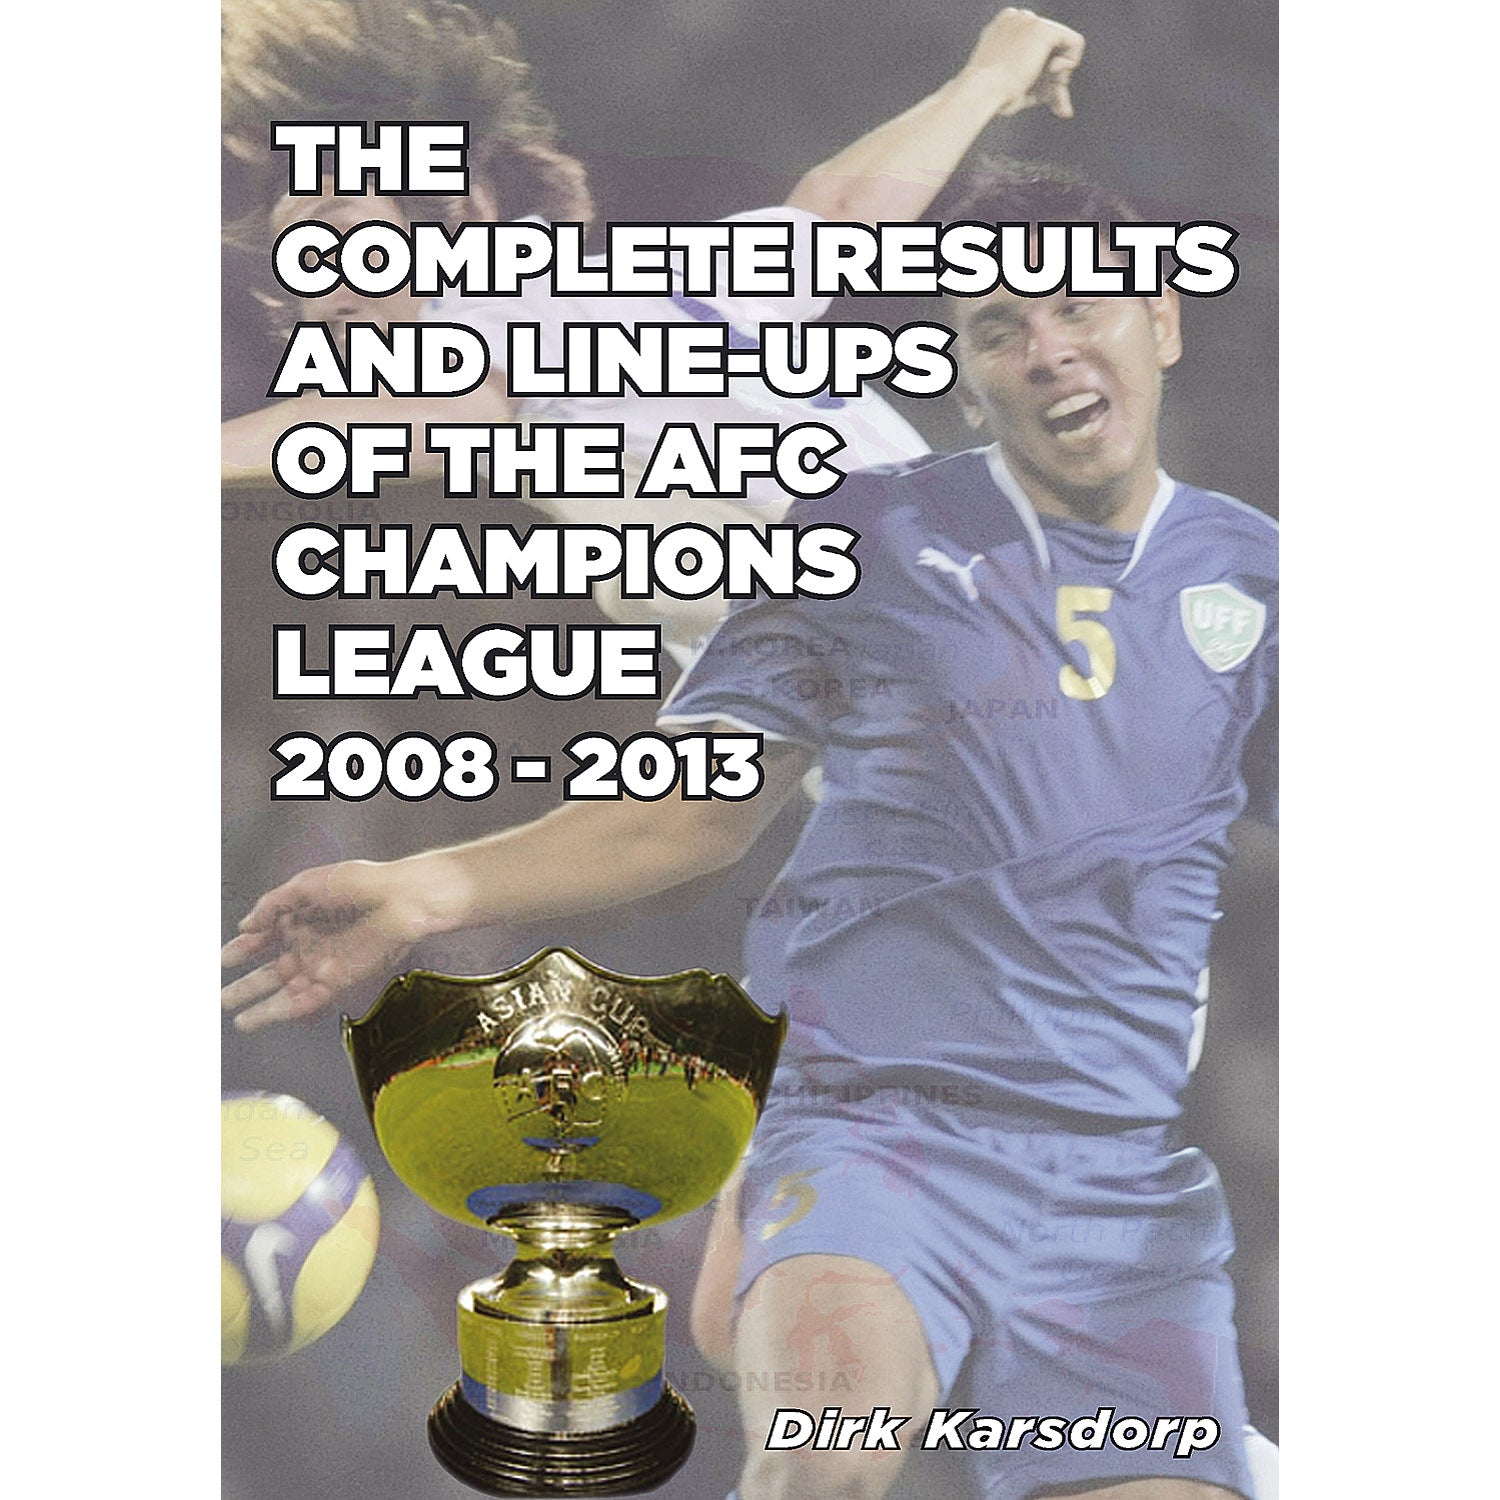 The Complete Results and Line-ups of the AFC Champions League 2008-2013